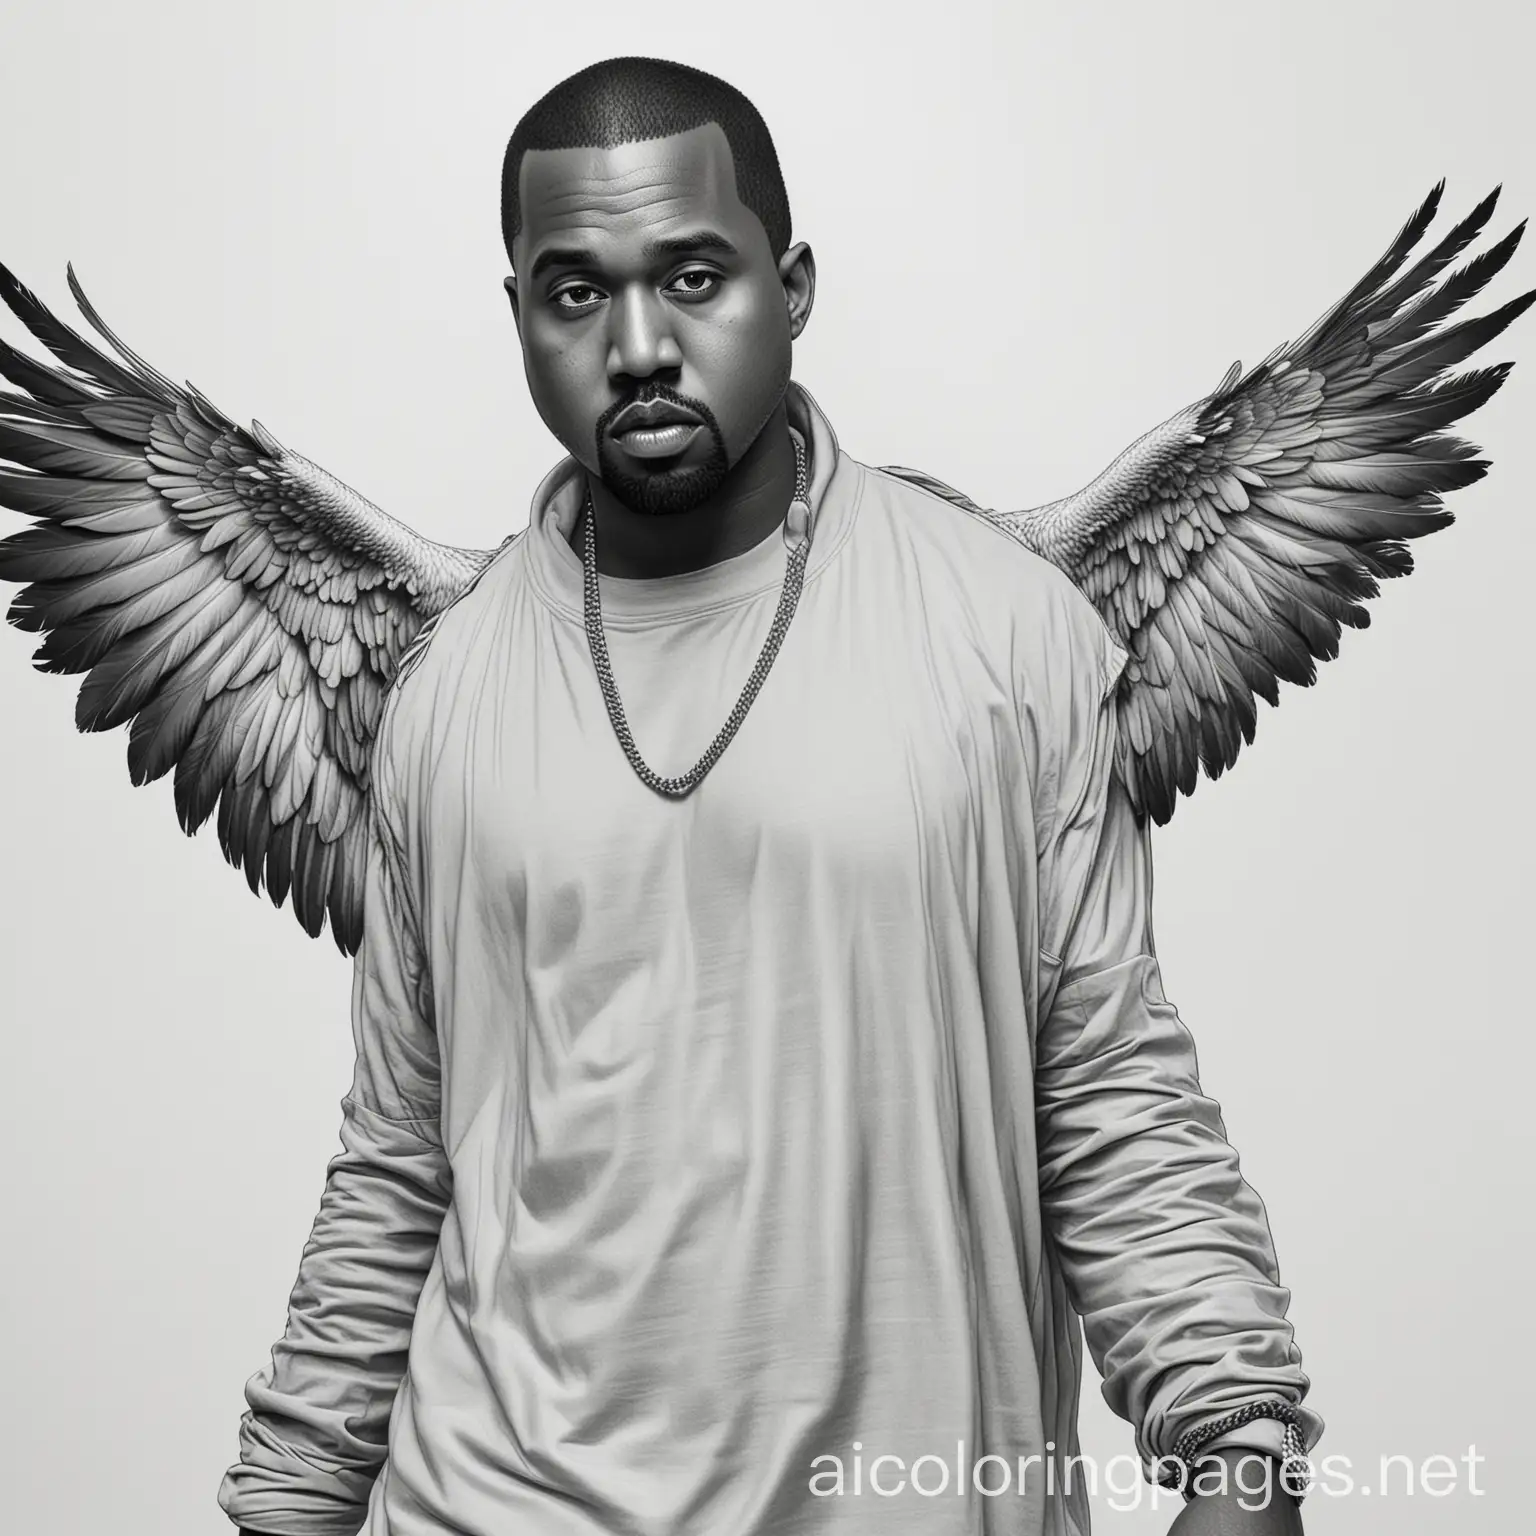 kanye west dropping vultures 2, Coloring Page, black and white, line art, white background, Simplicity, Ample White Space